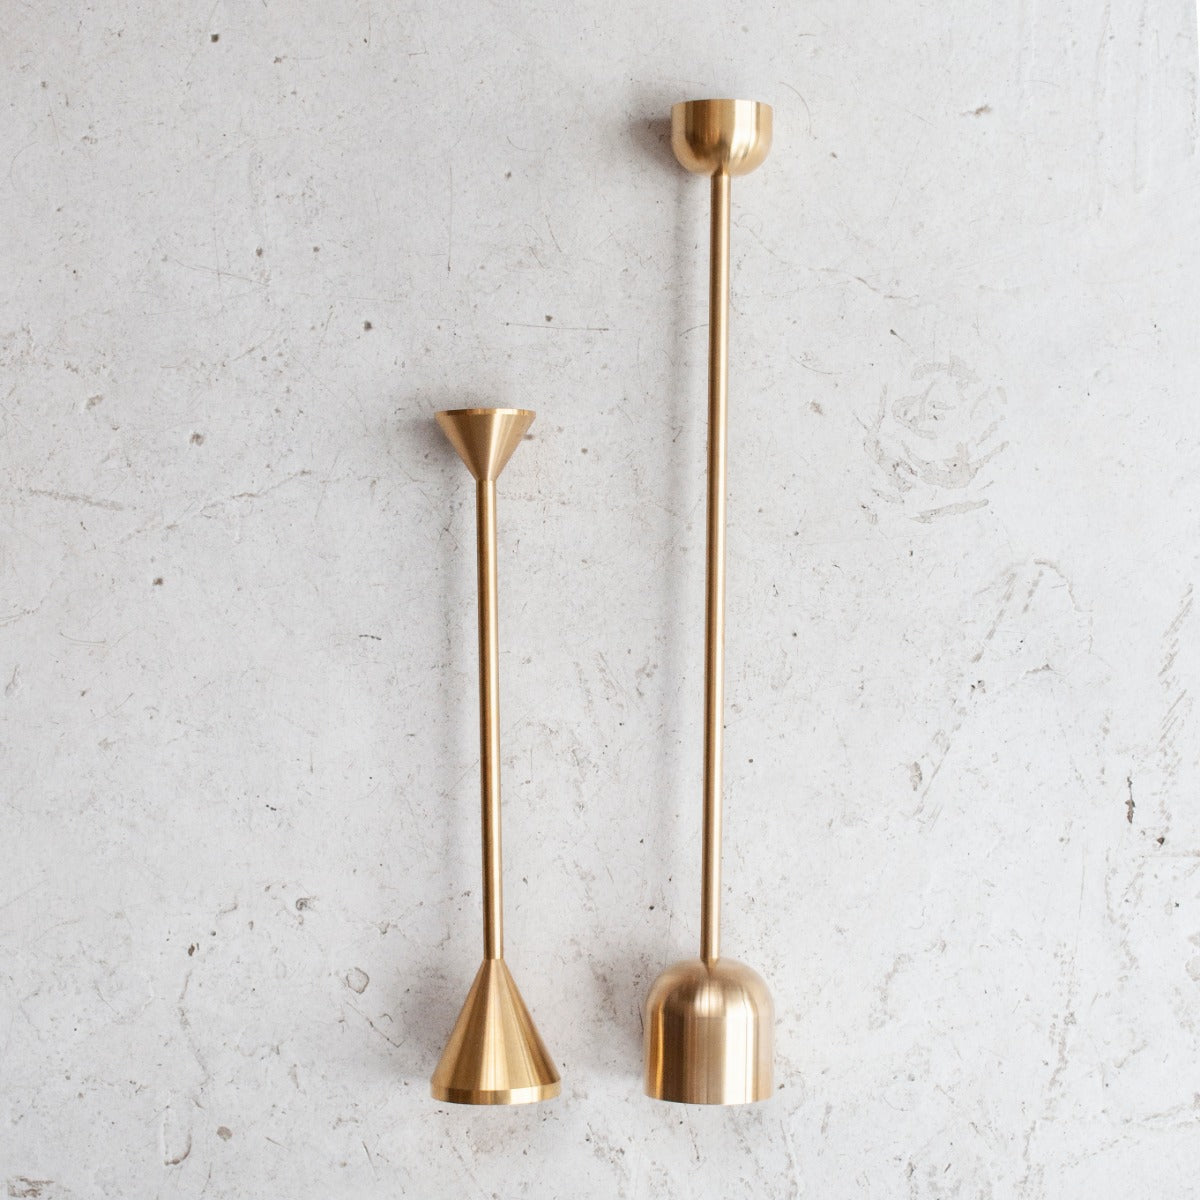 Fort Standard's tall brass candlestick with dome shaped base